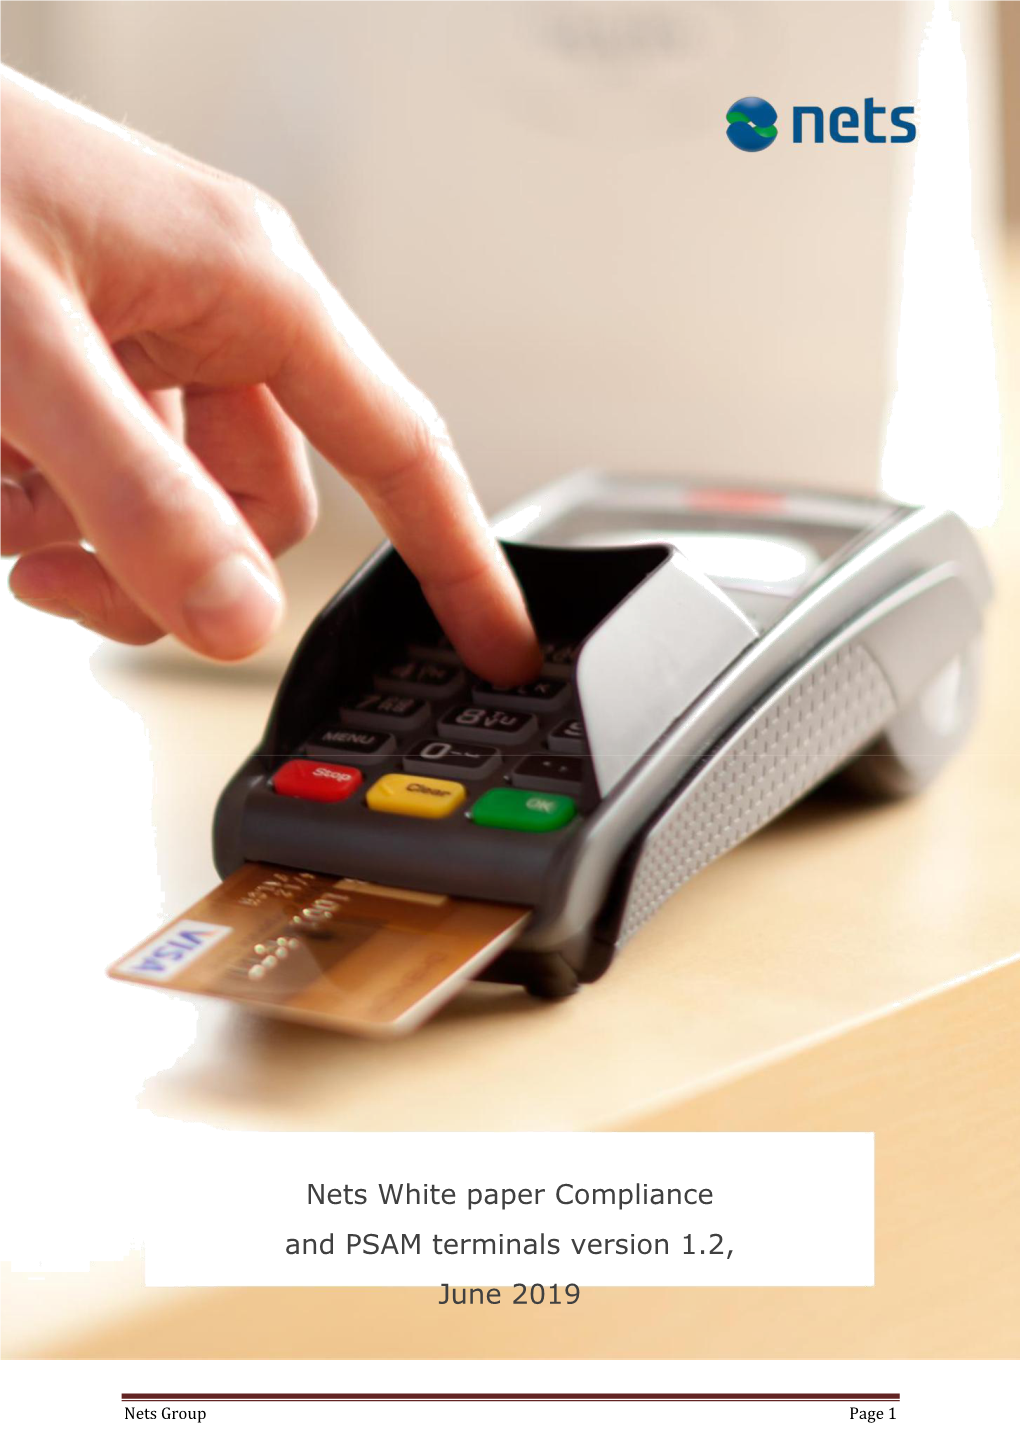 Nets White Paper Compliance and PSAM Terminals Version 1.2, June 2019